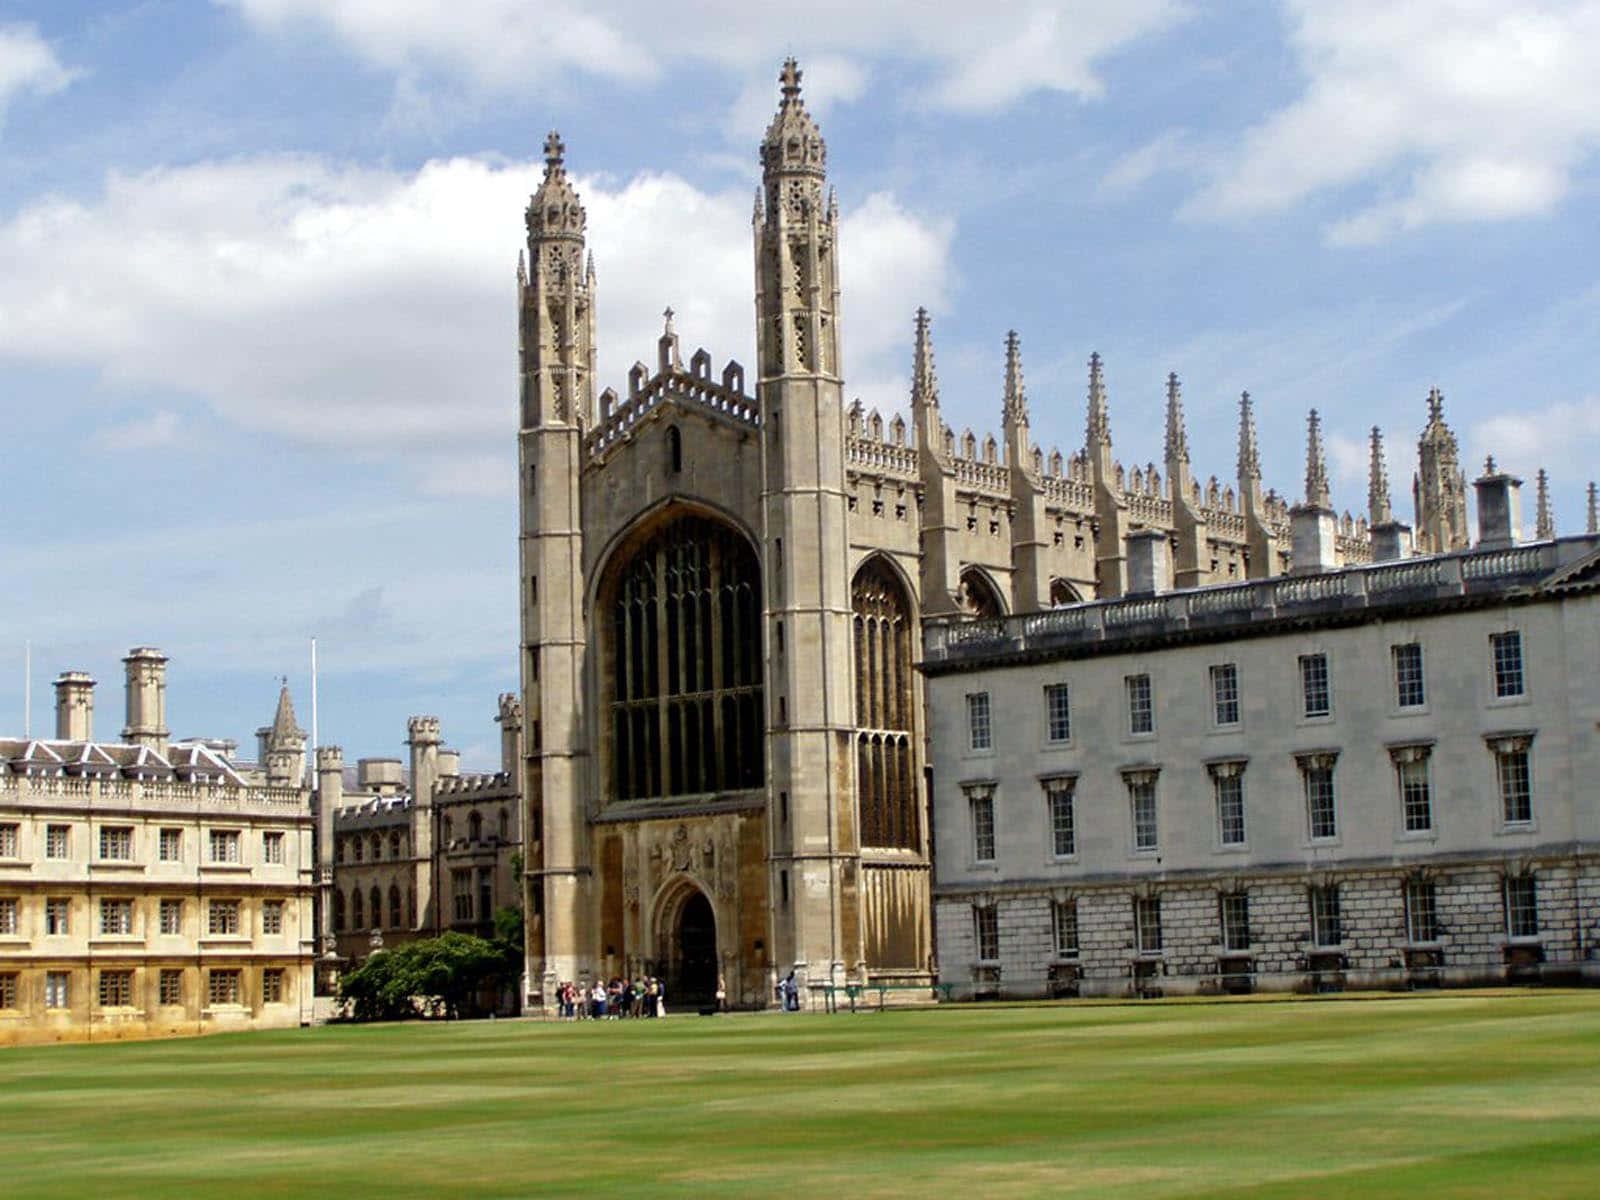 Majestic King's College of Cambridge University in England Wallpaper